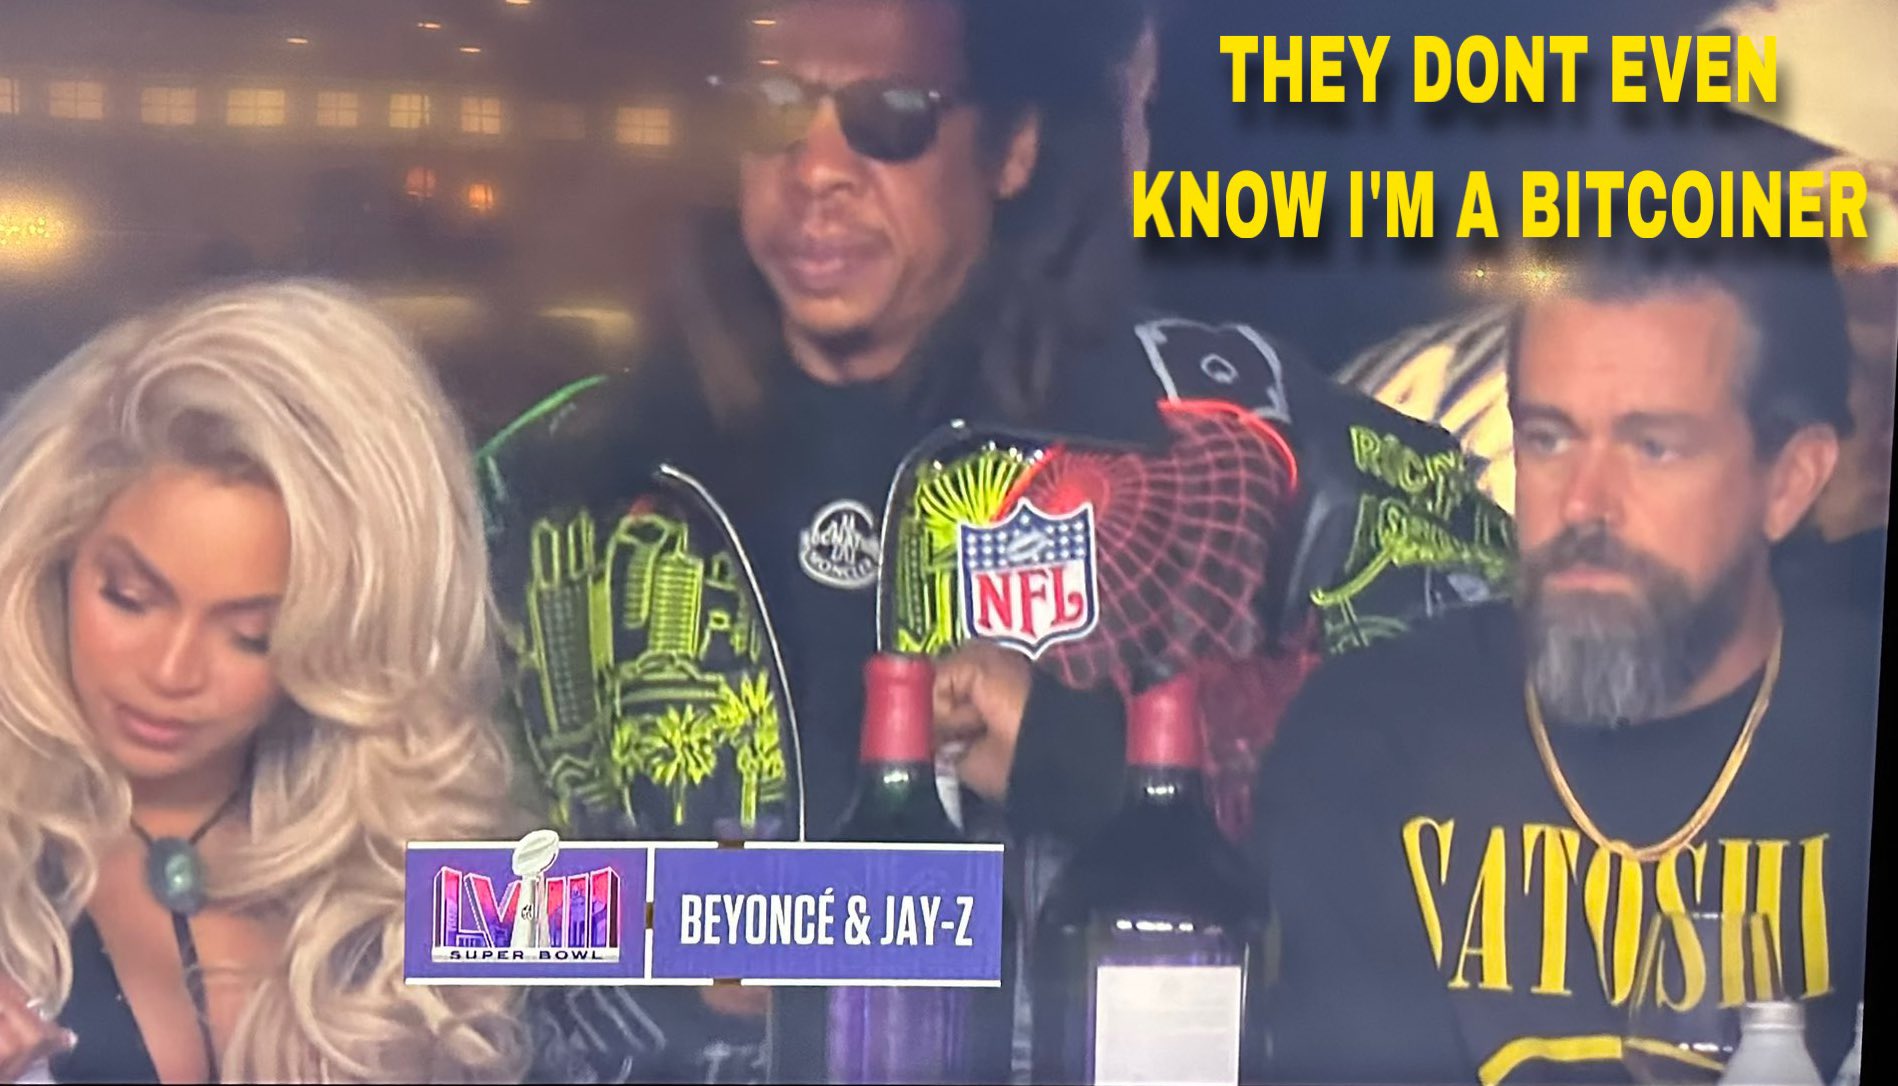 Capp
NFL
V BEYONCE & JAY-Z
SUPER BOWL
THEY DONT EVEN
KNOW I'M A BITCOINER
VATOSHI